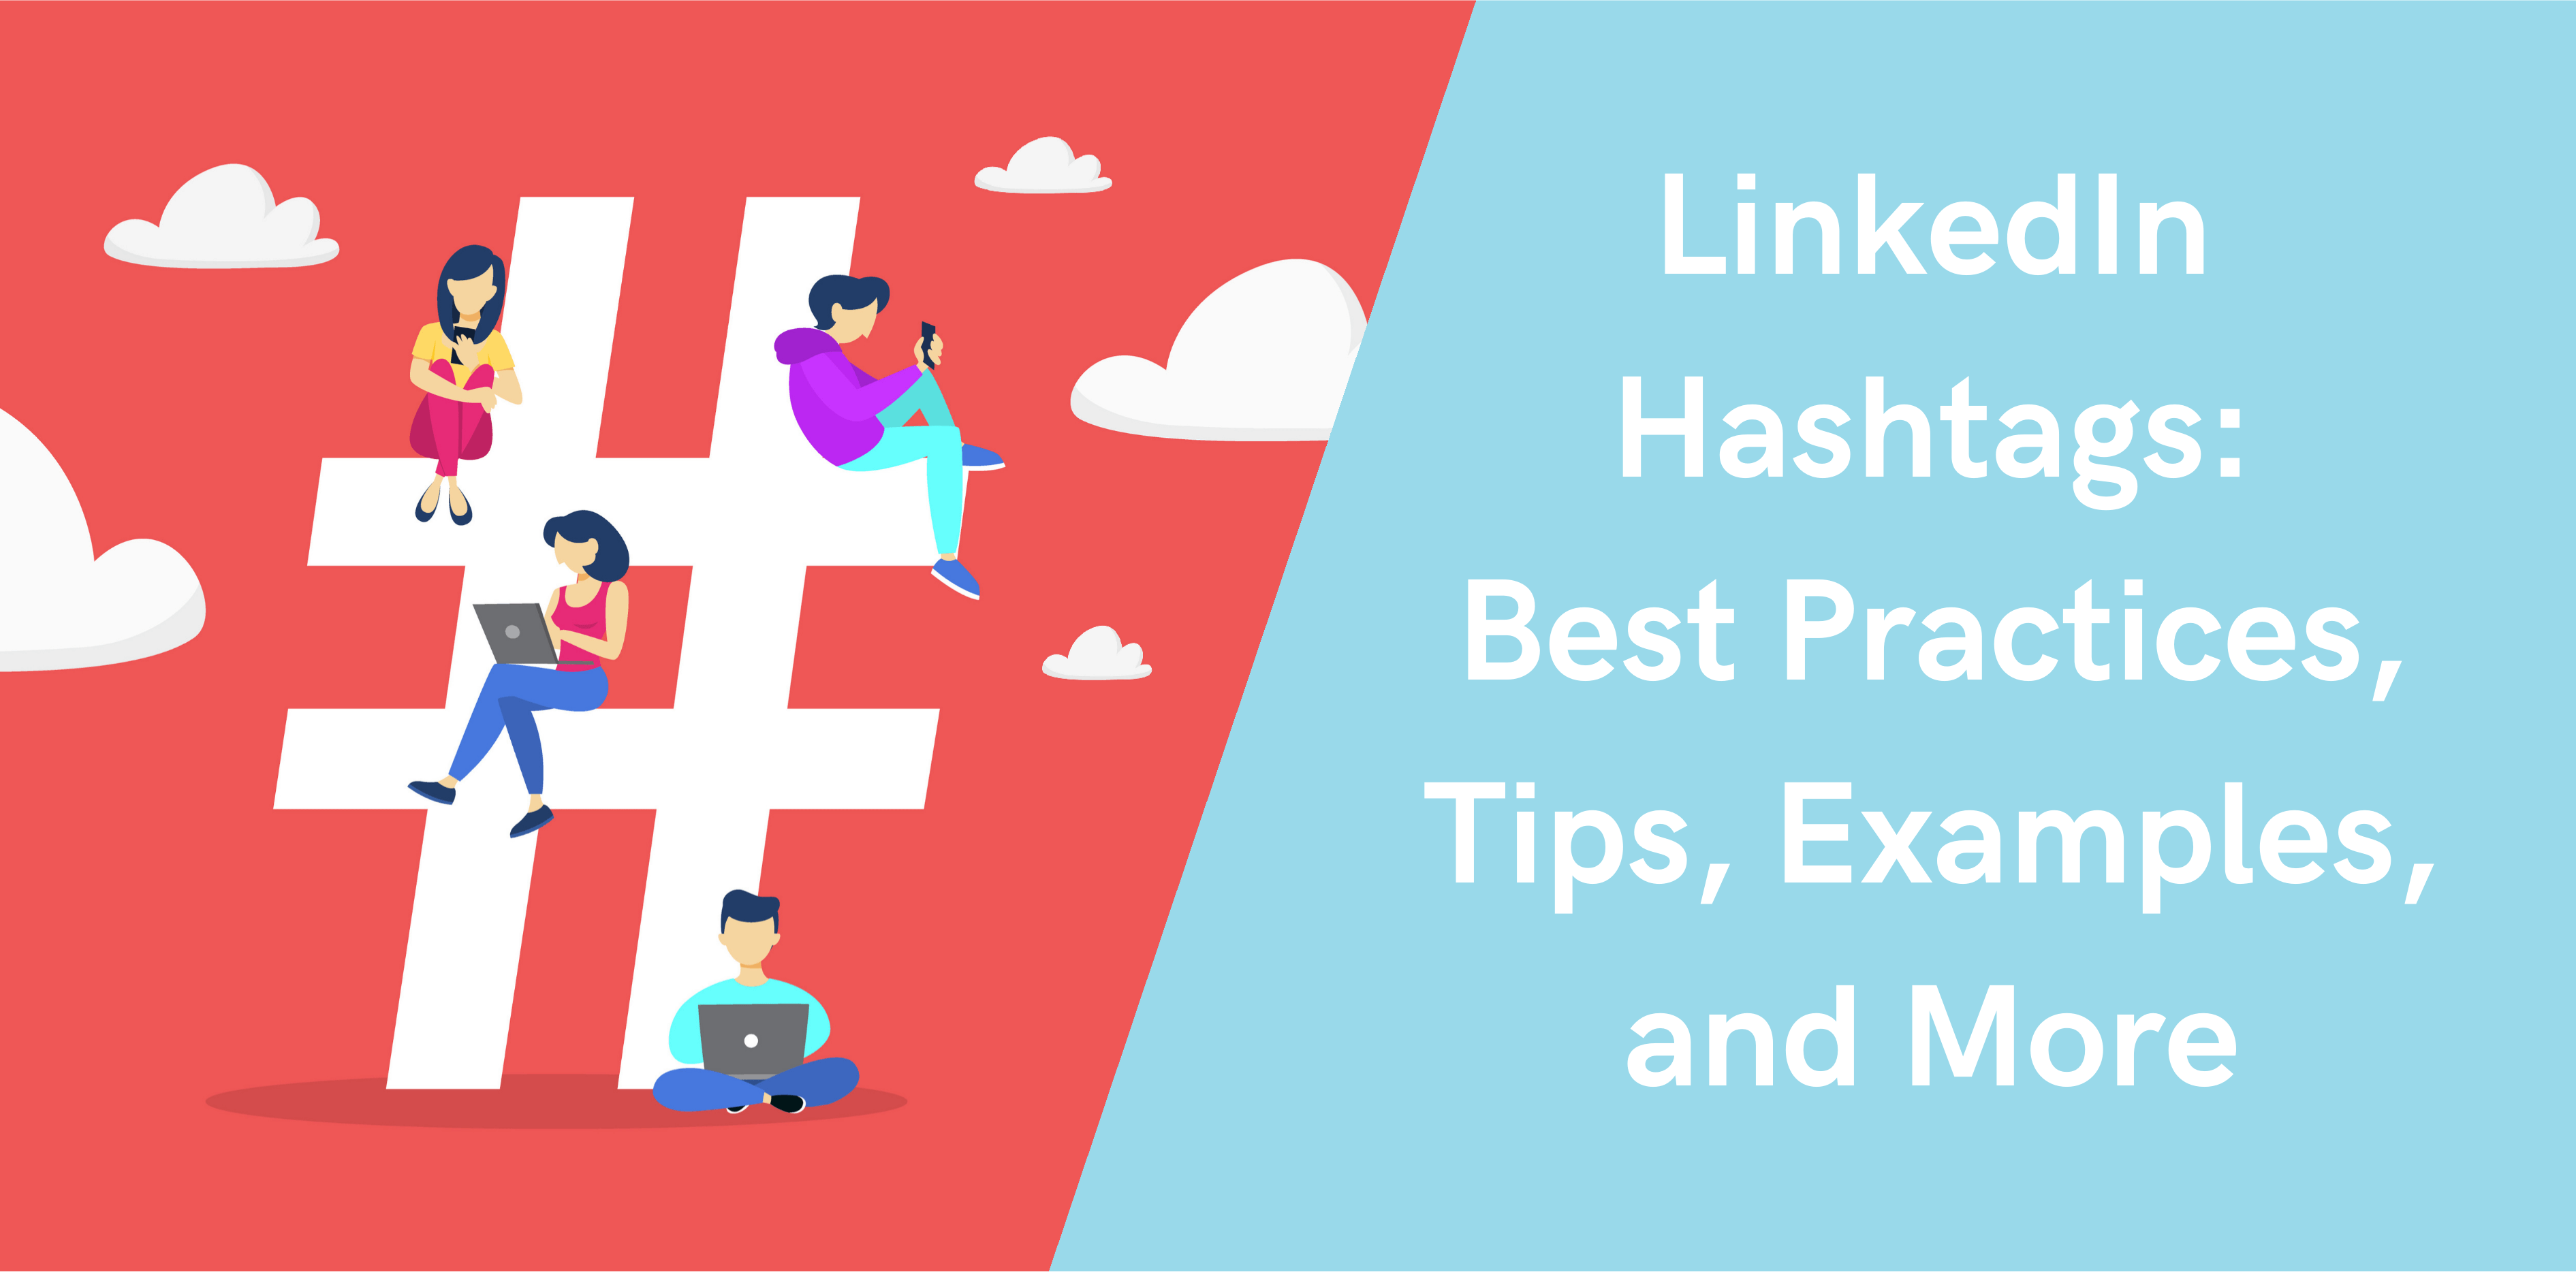 LinkedIn Hashtags: to Use Them to Grow Business Octopus